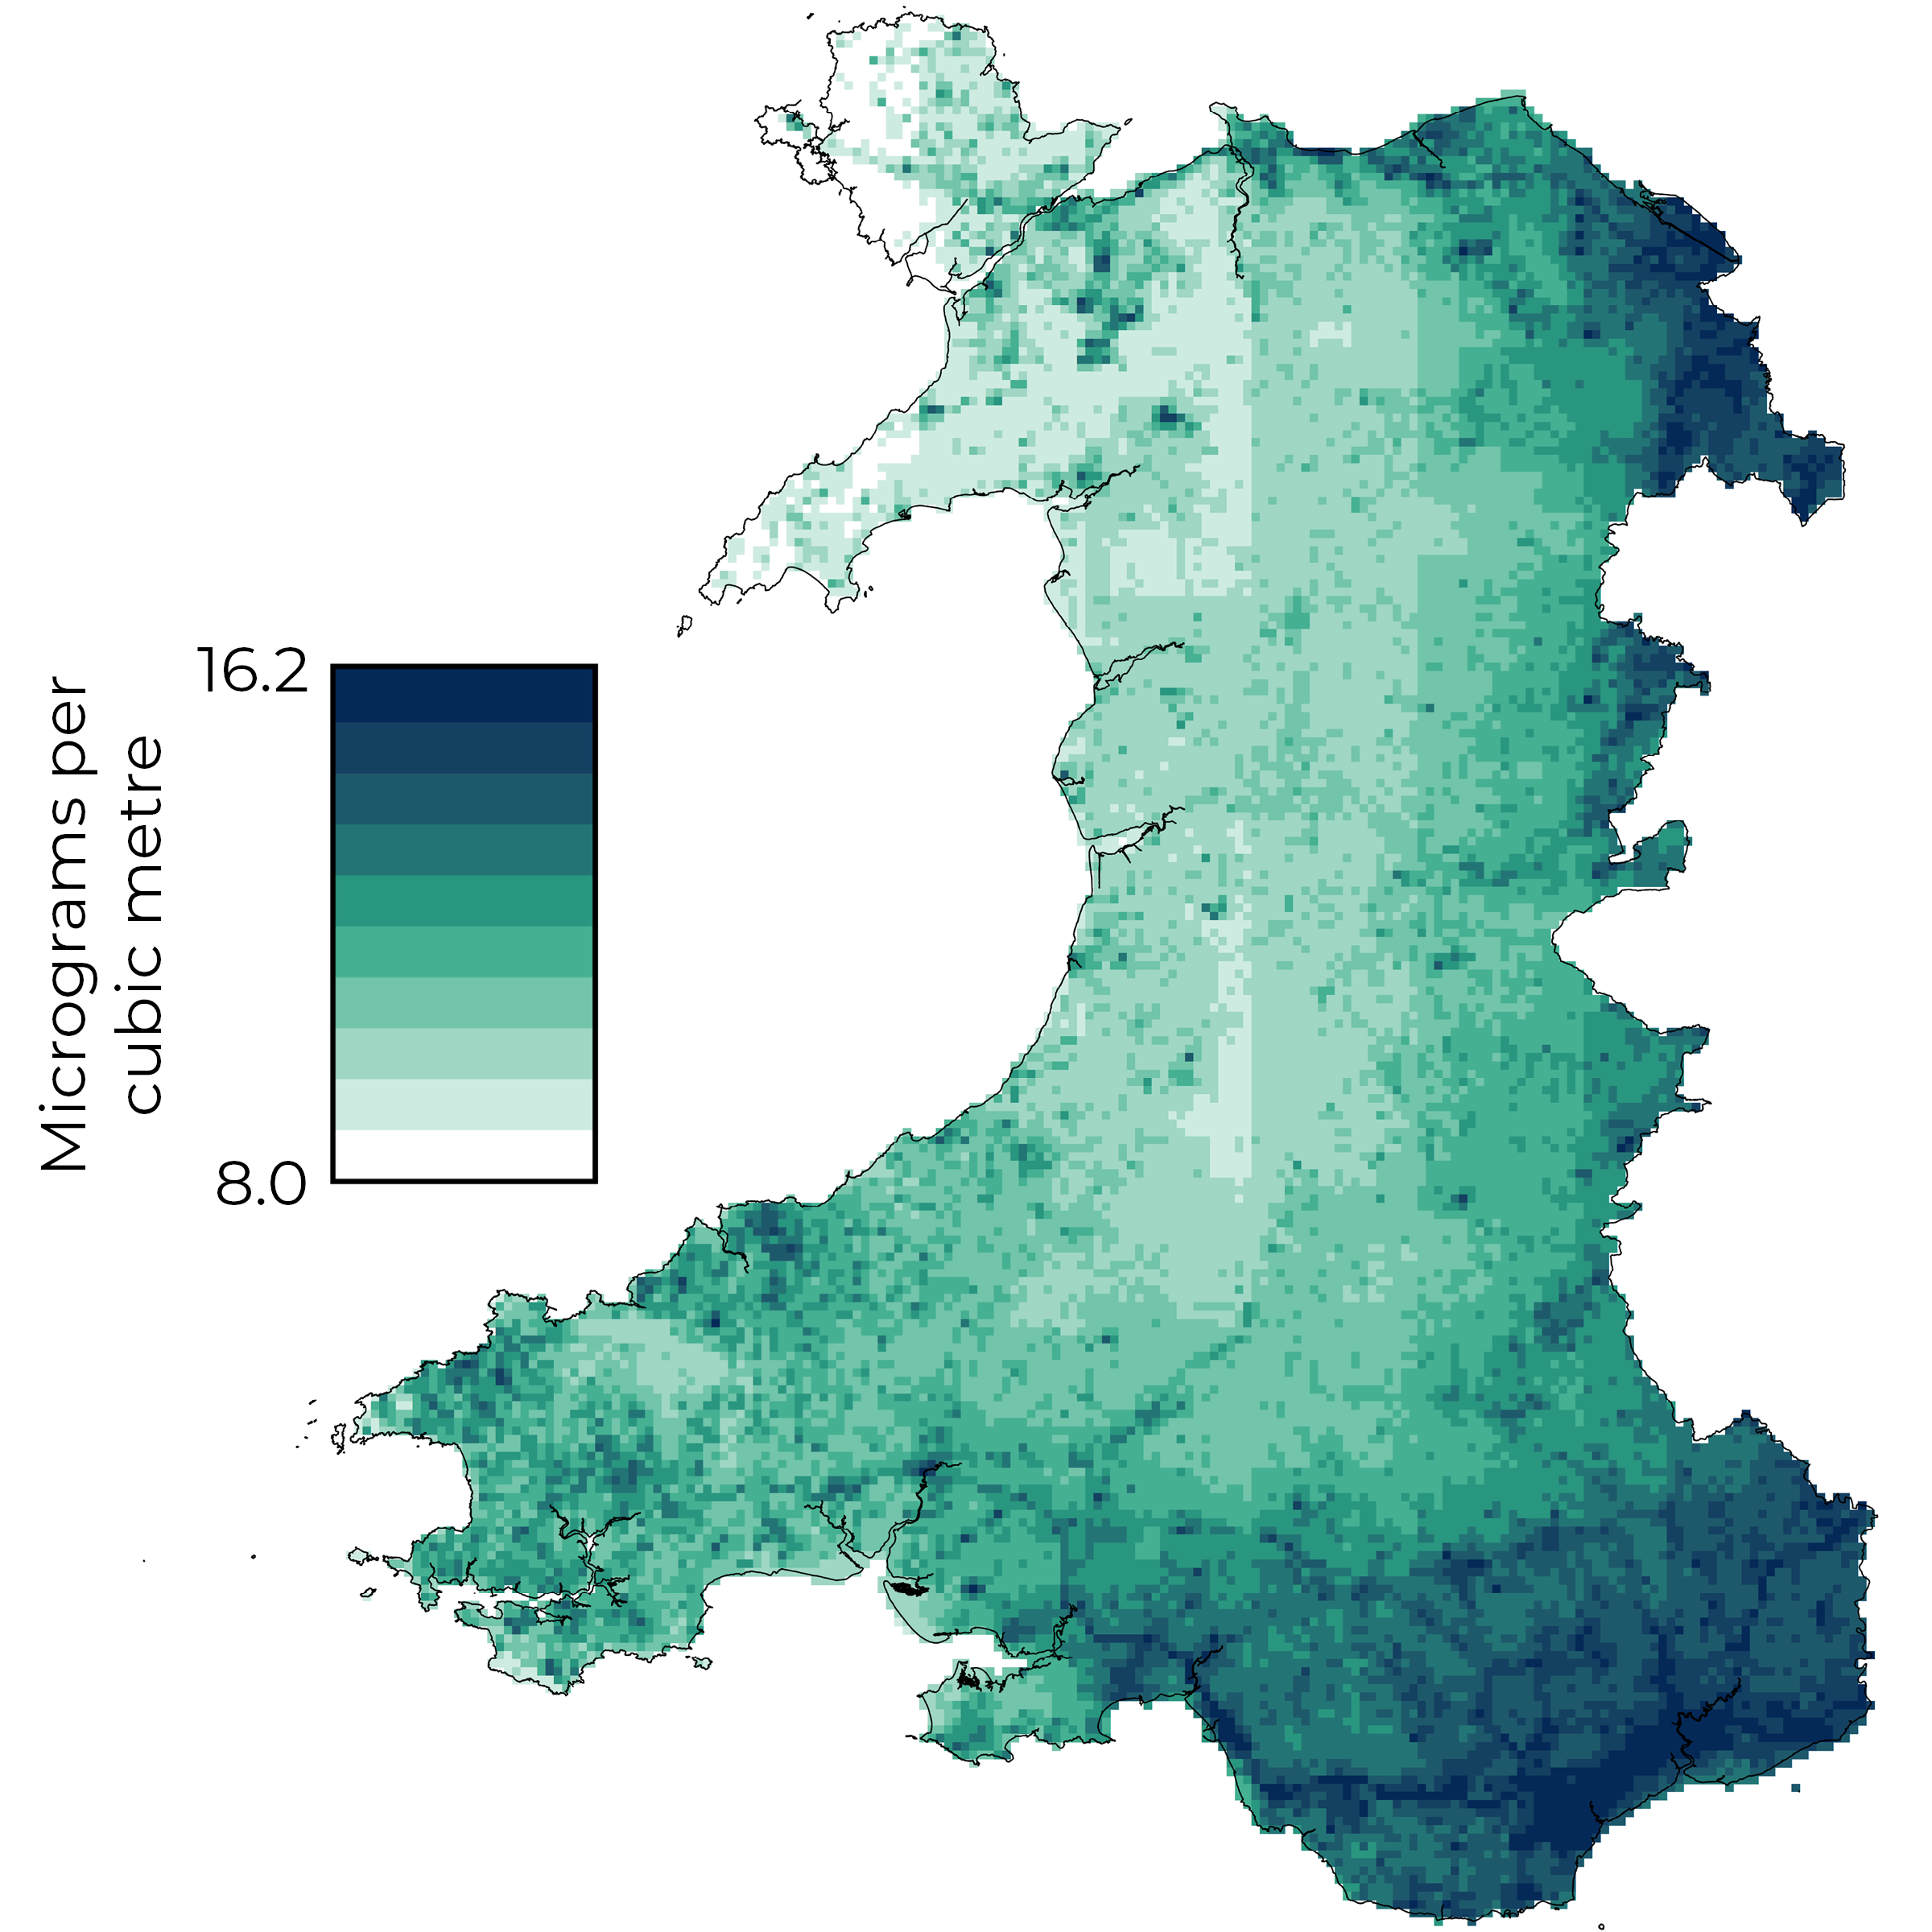 A map of Wales with colour scale showing the annual mean concentration of PM10 ranging from 8.0 to 16.2 micrograms per cubic metre. The lowest concentrations are in mid Wales and north-west Wales. The highest concentrations are in south-east Wales and north-east Wales. Higher concentrations are also visible in urban areas and along major roads, particularly the M4 corridor.